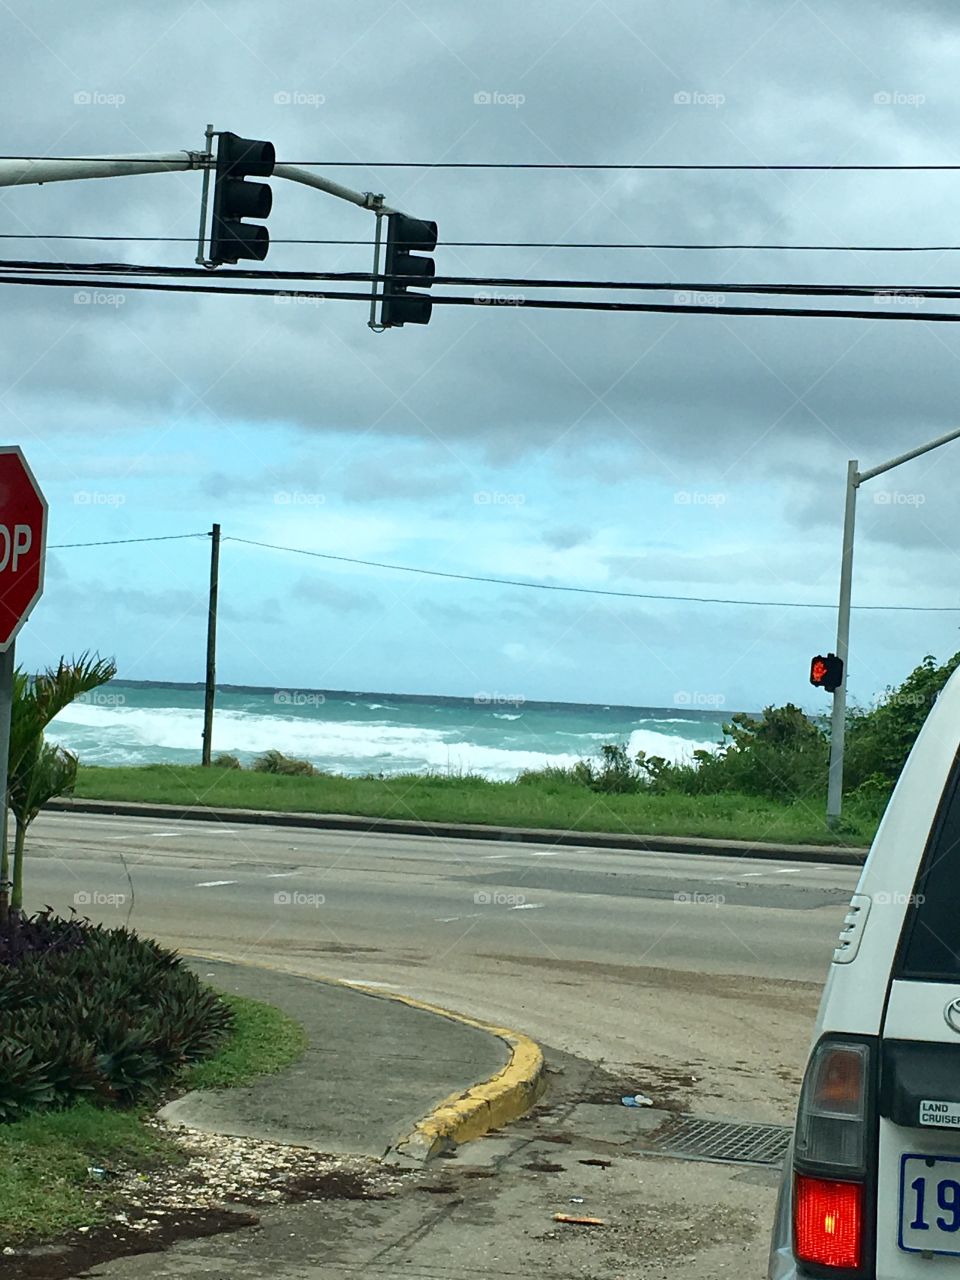 The view of Sea and Wave at traffic light